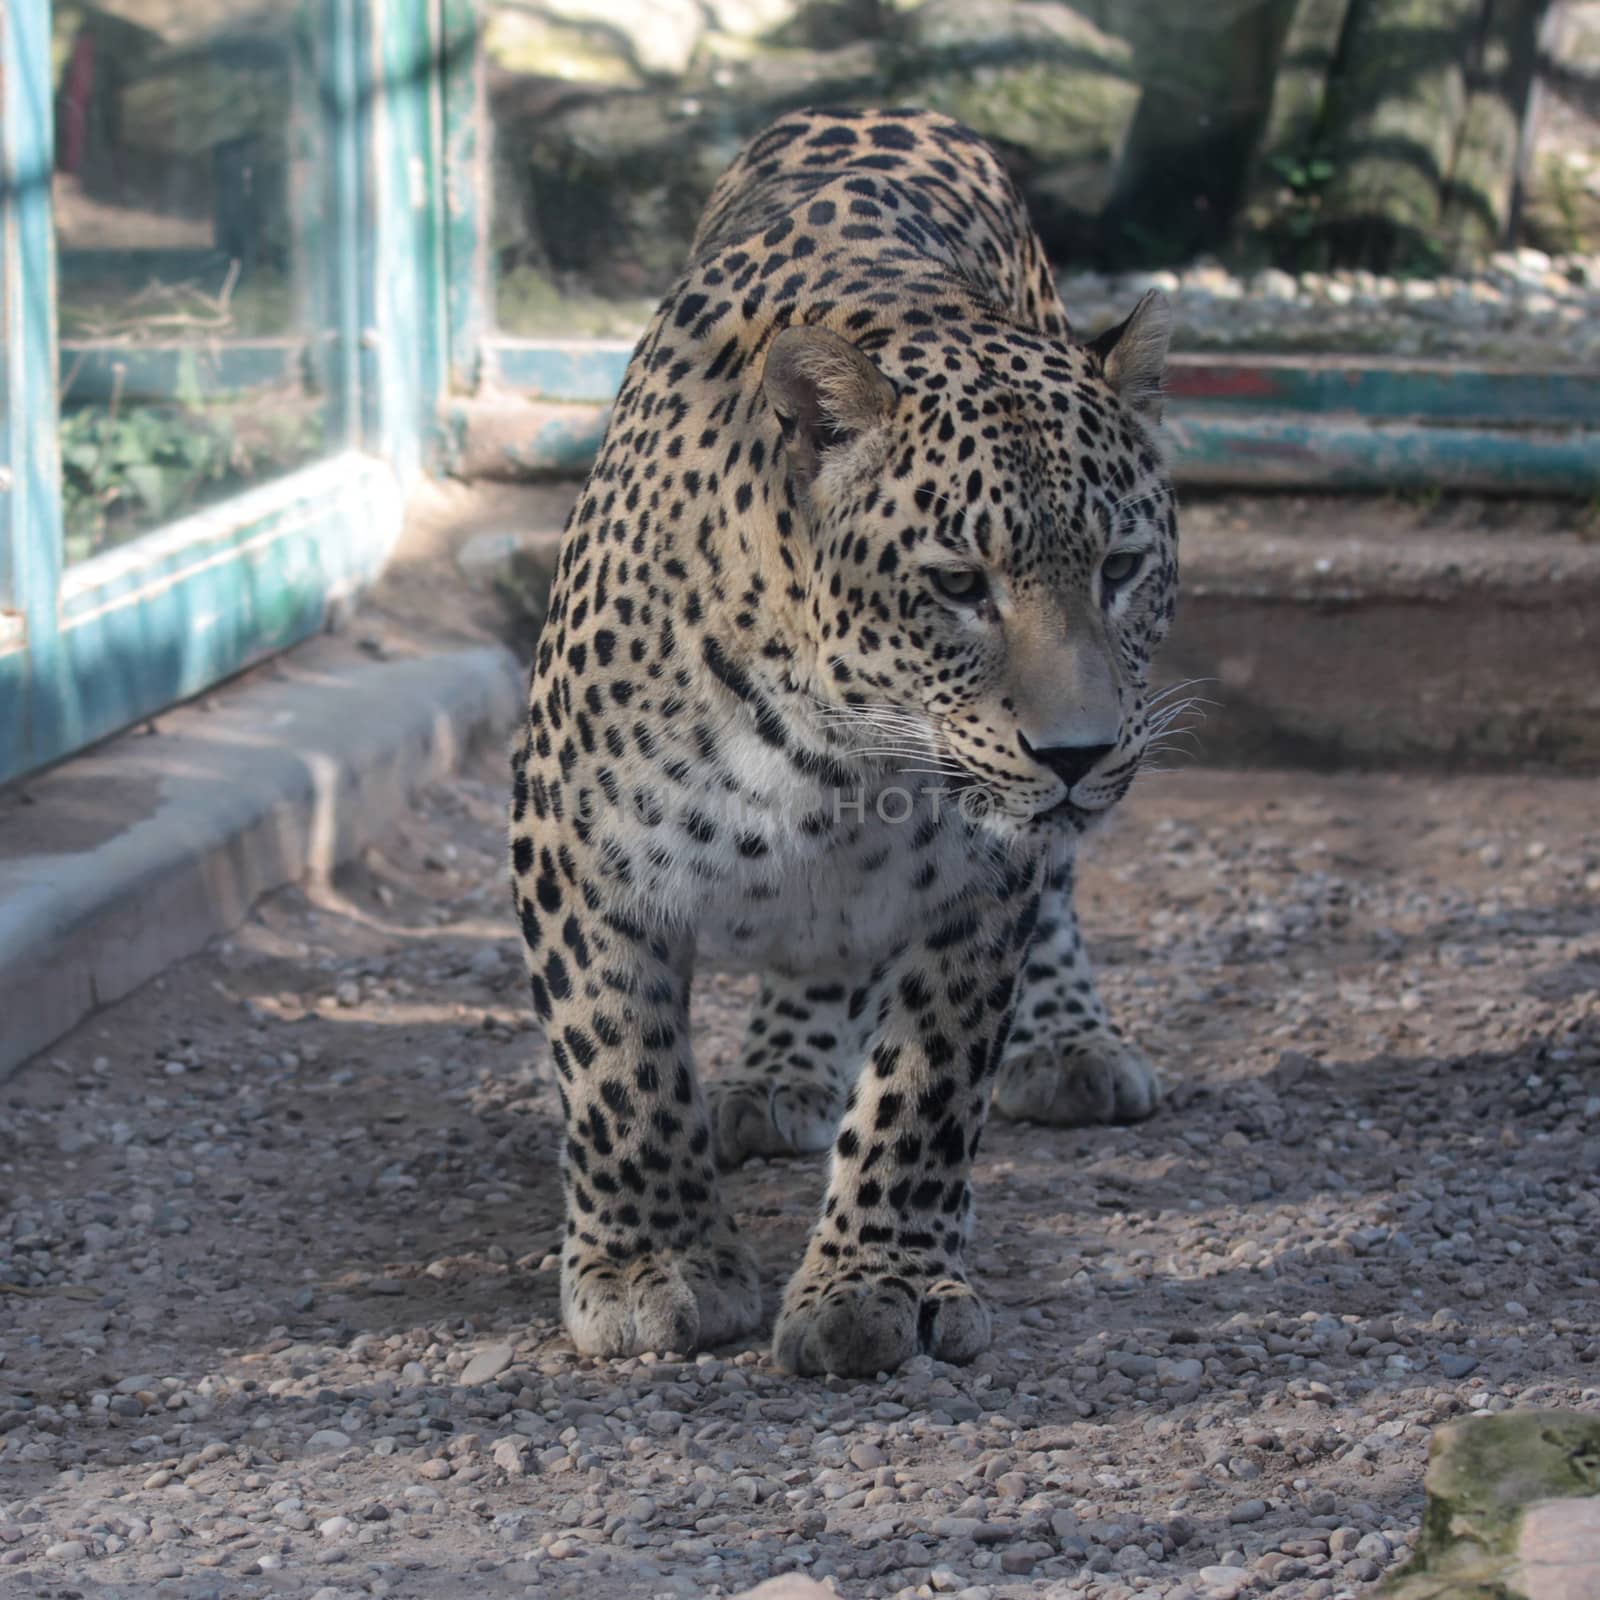 Leopard in zoo passes through cage